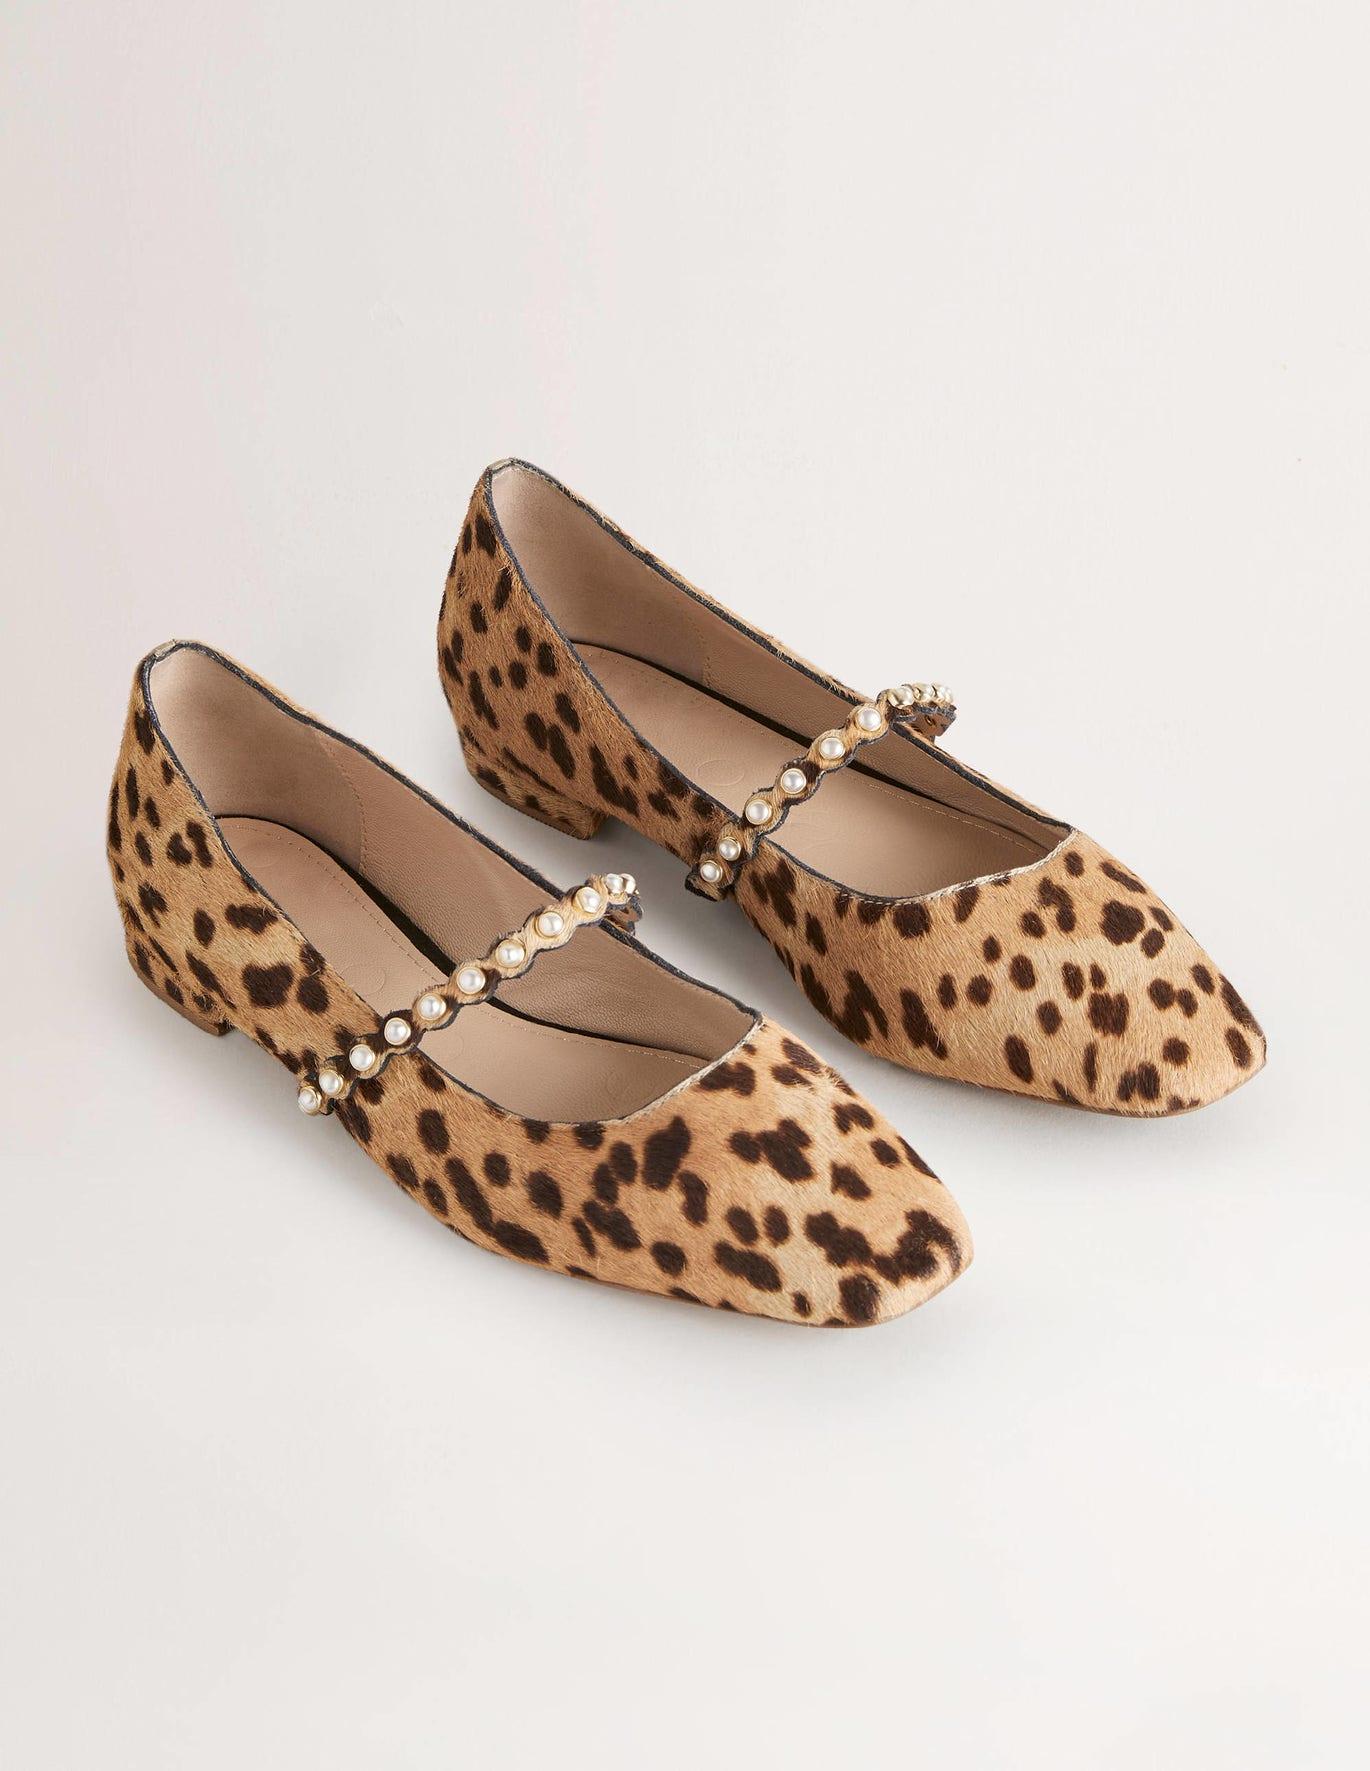 Boden Pearl Strap Ballerina Flats in Natural | Lyst